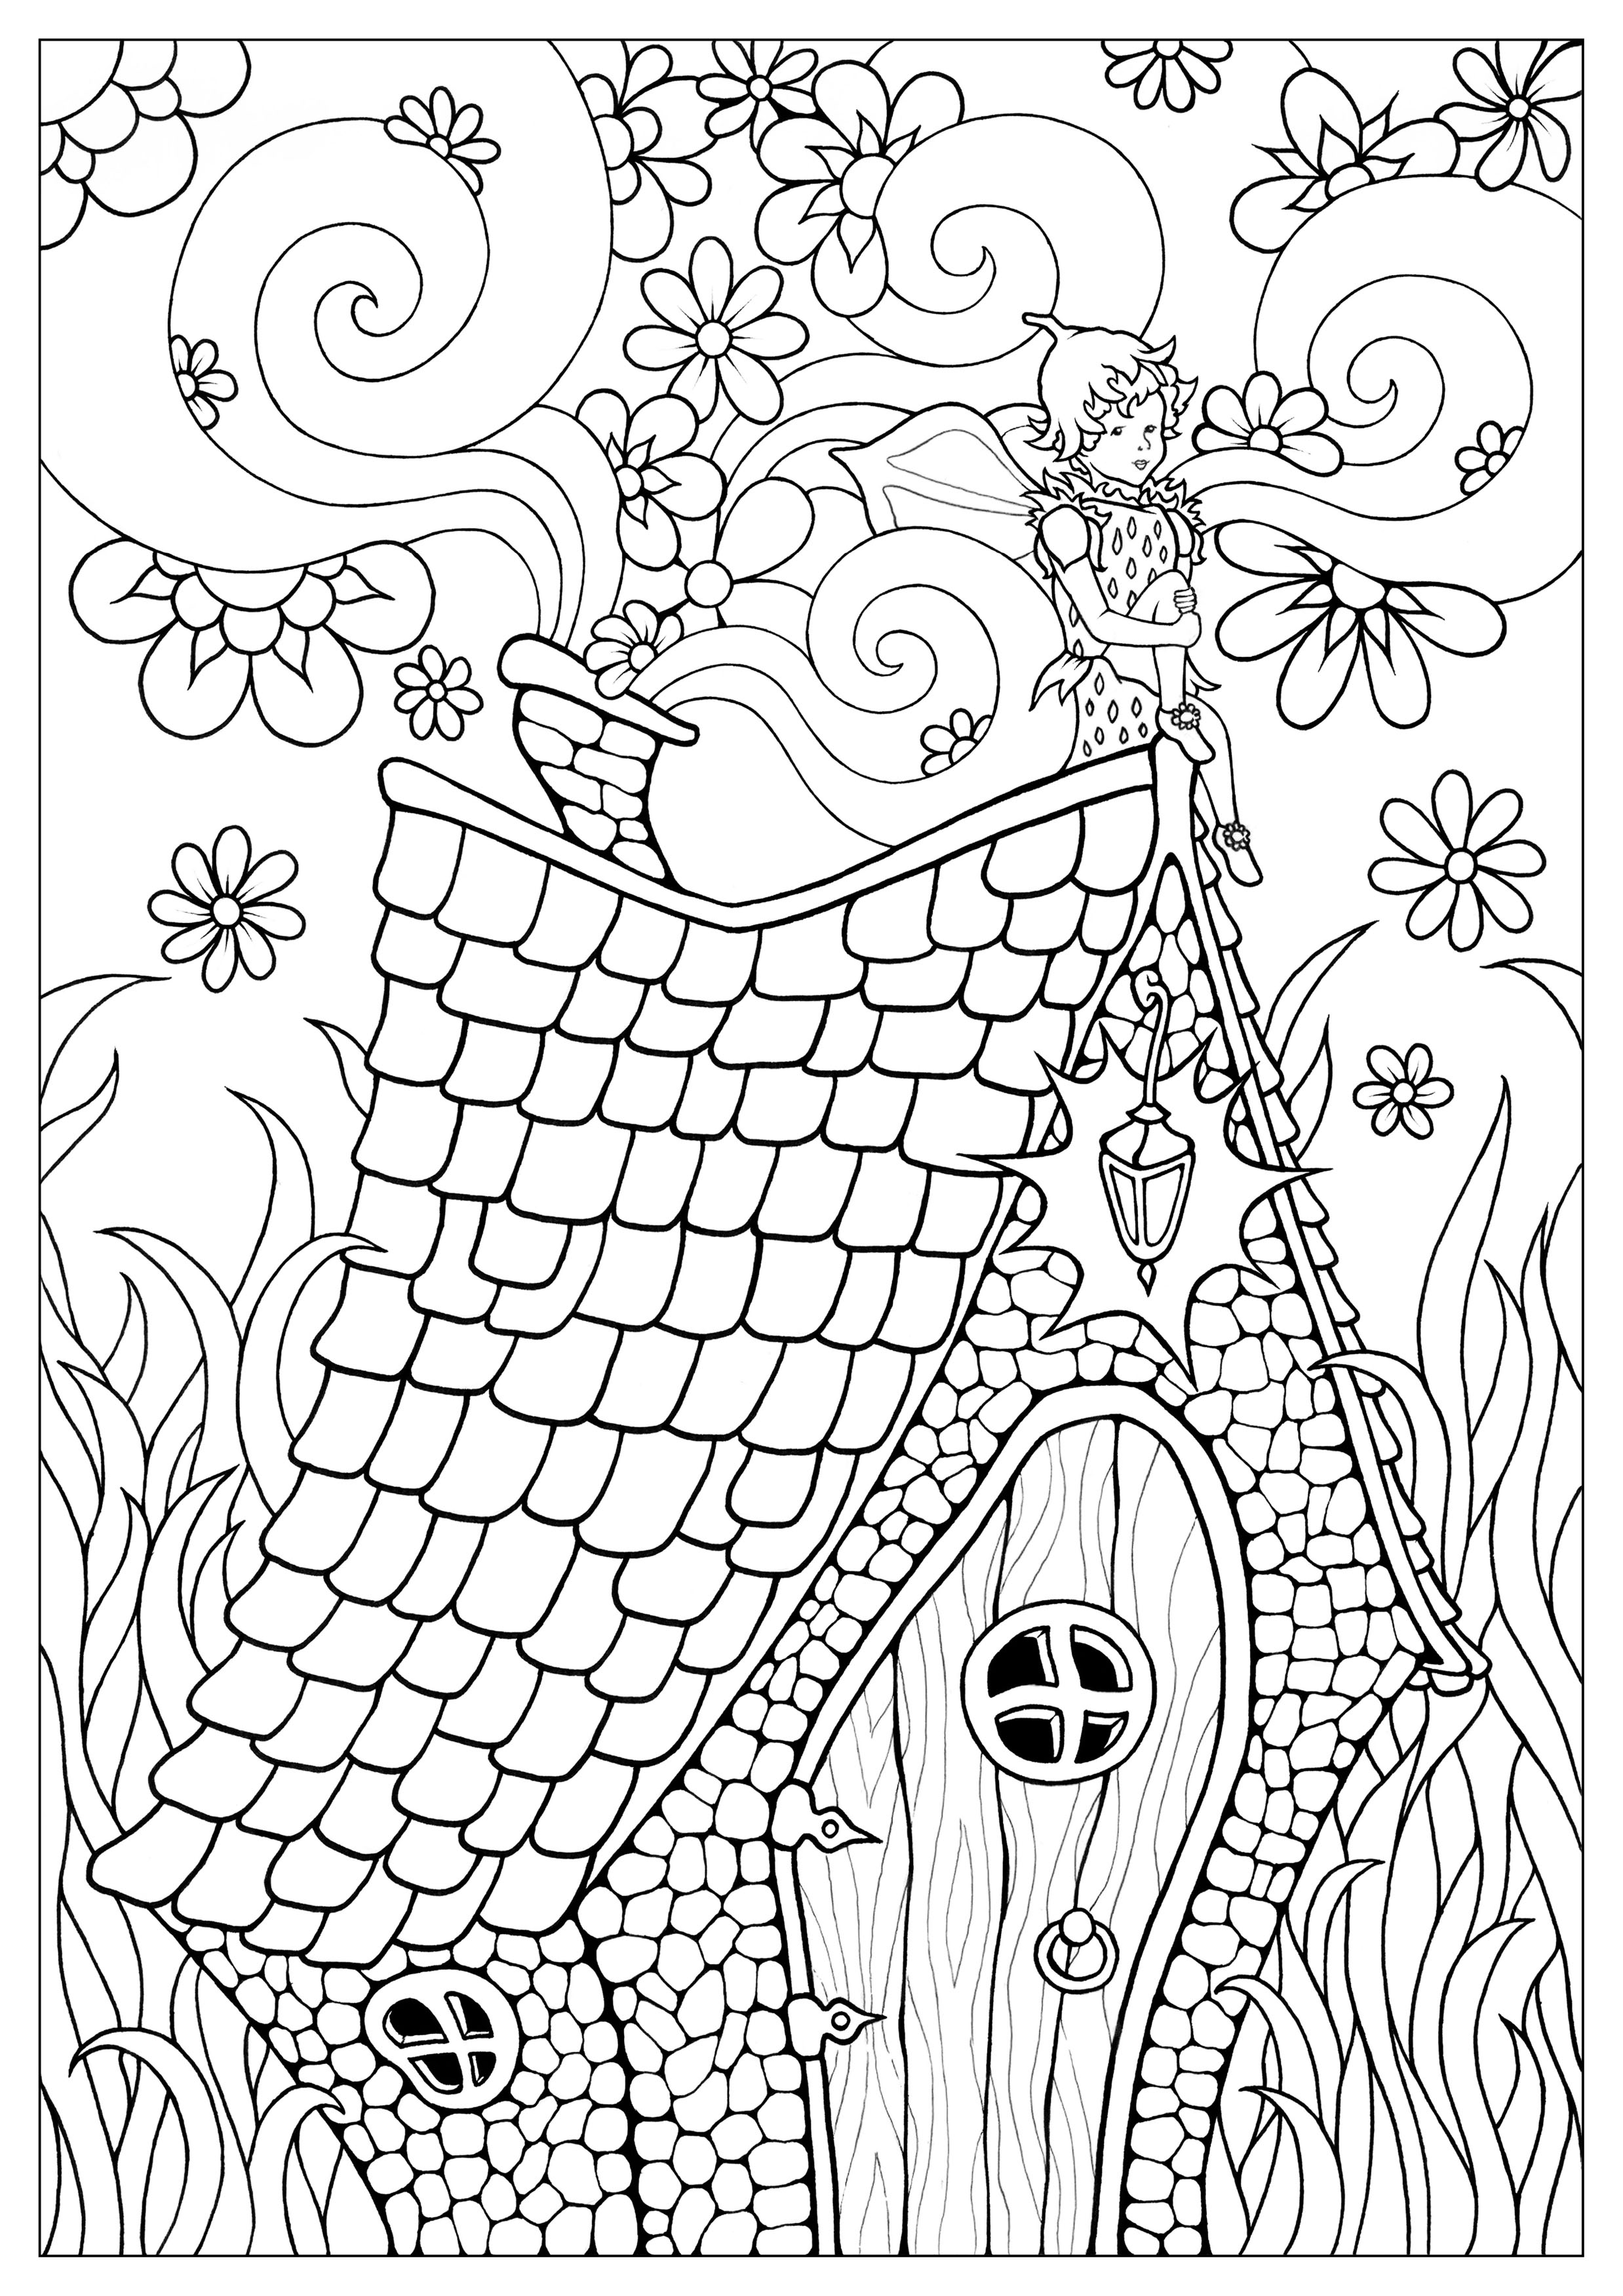 Download Strawberry Fairy Konstantinos Liaramantzas Return To Childhood Adult Coloring Pages